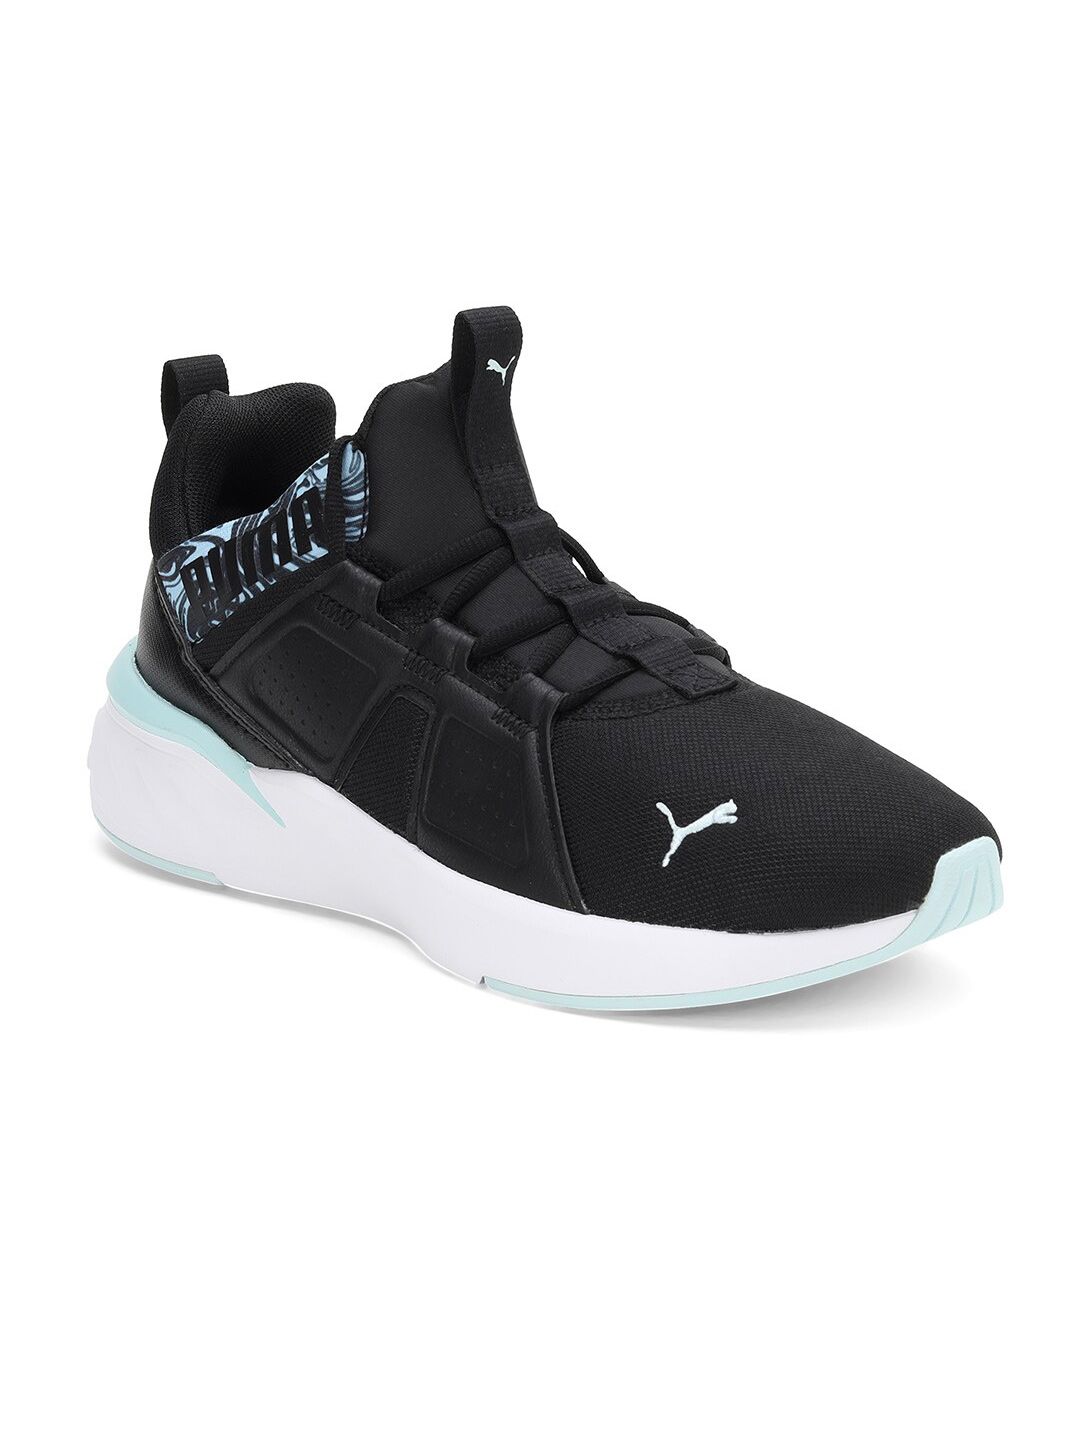 Puma Women Black Contempt Demi Remix Marble Textile Training or Gym Shoes Price in India